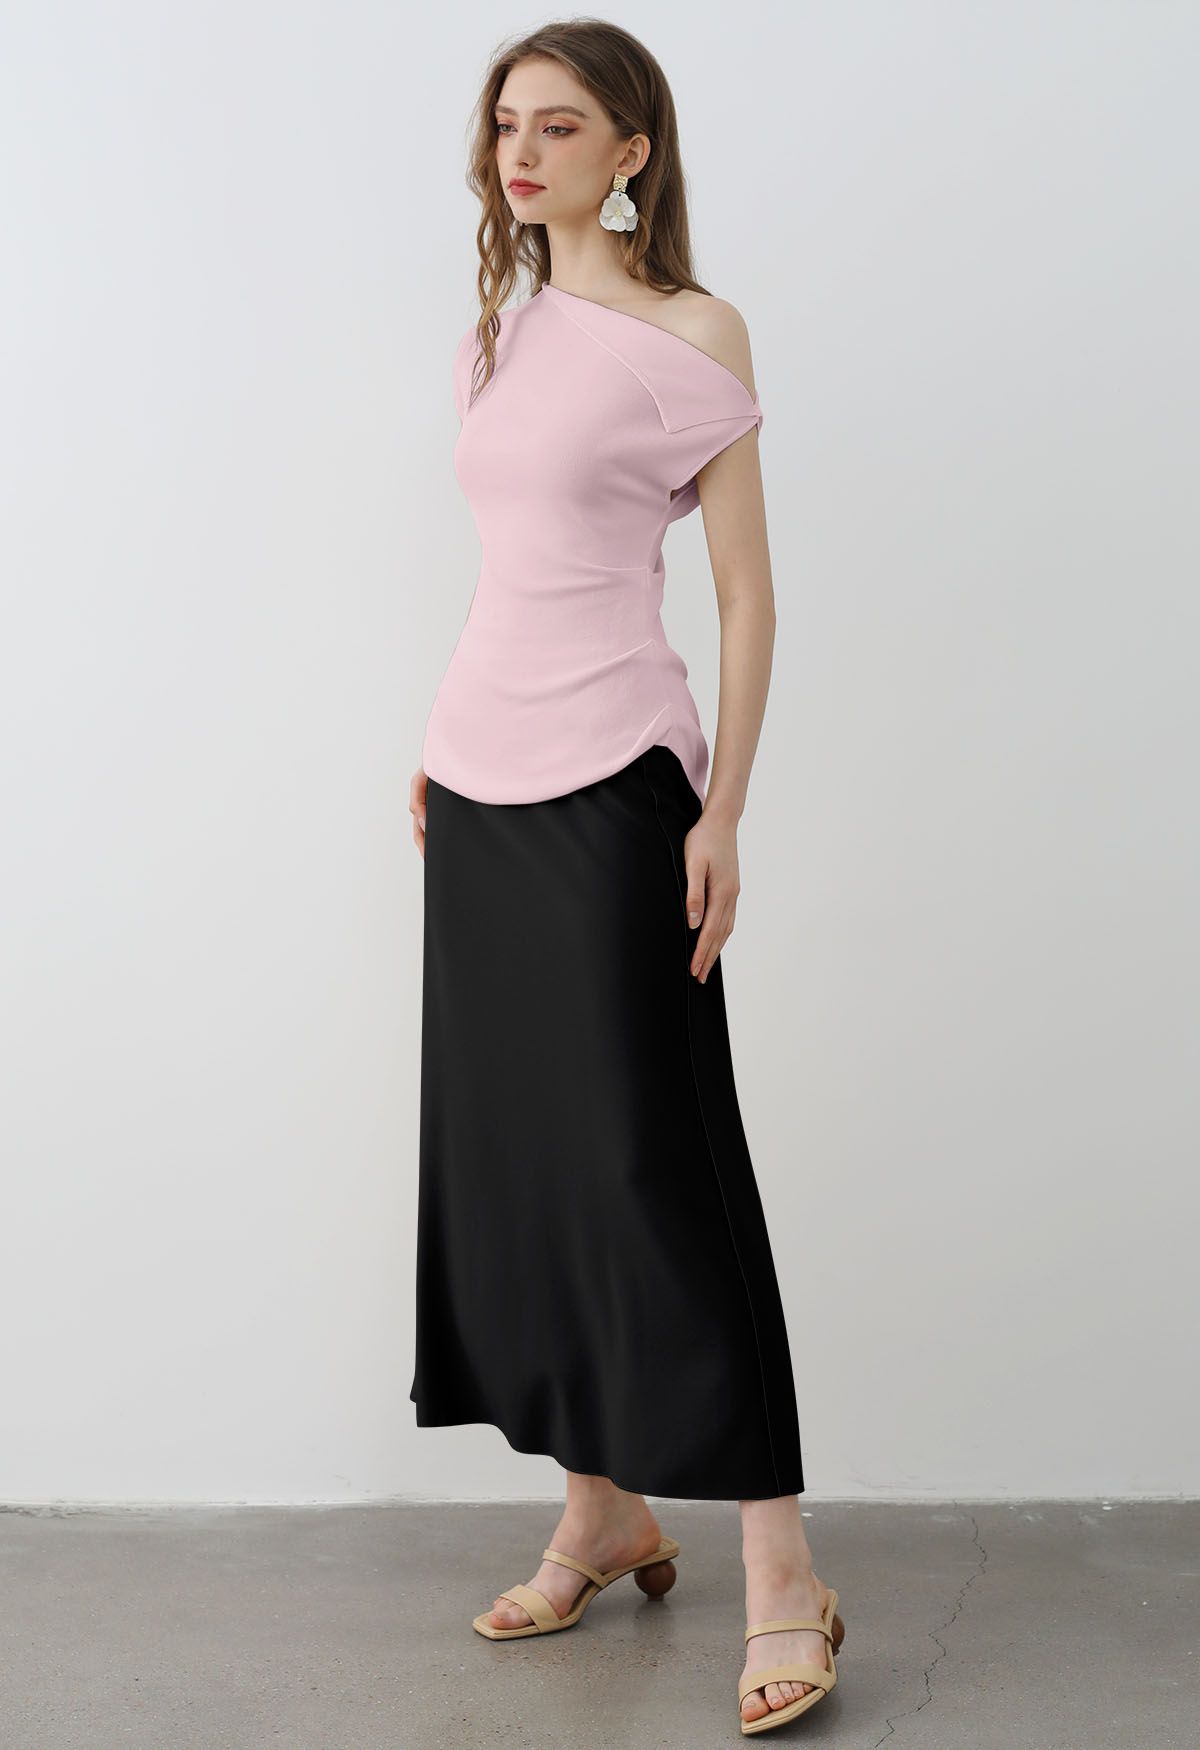 Asymmetric Folded Collar Knit Top in Pink